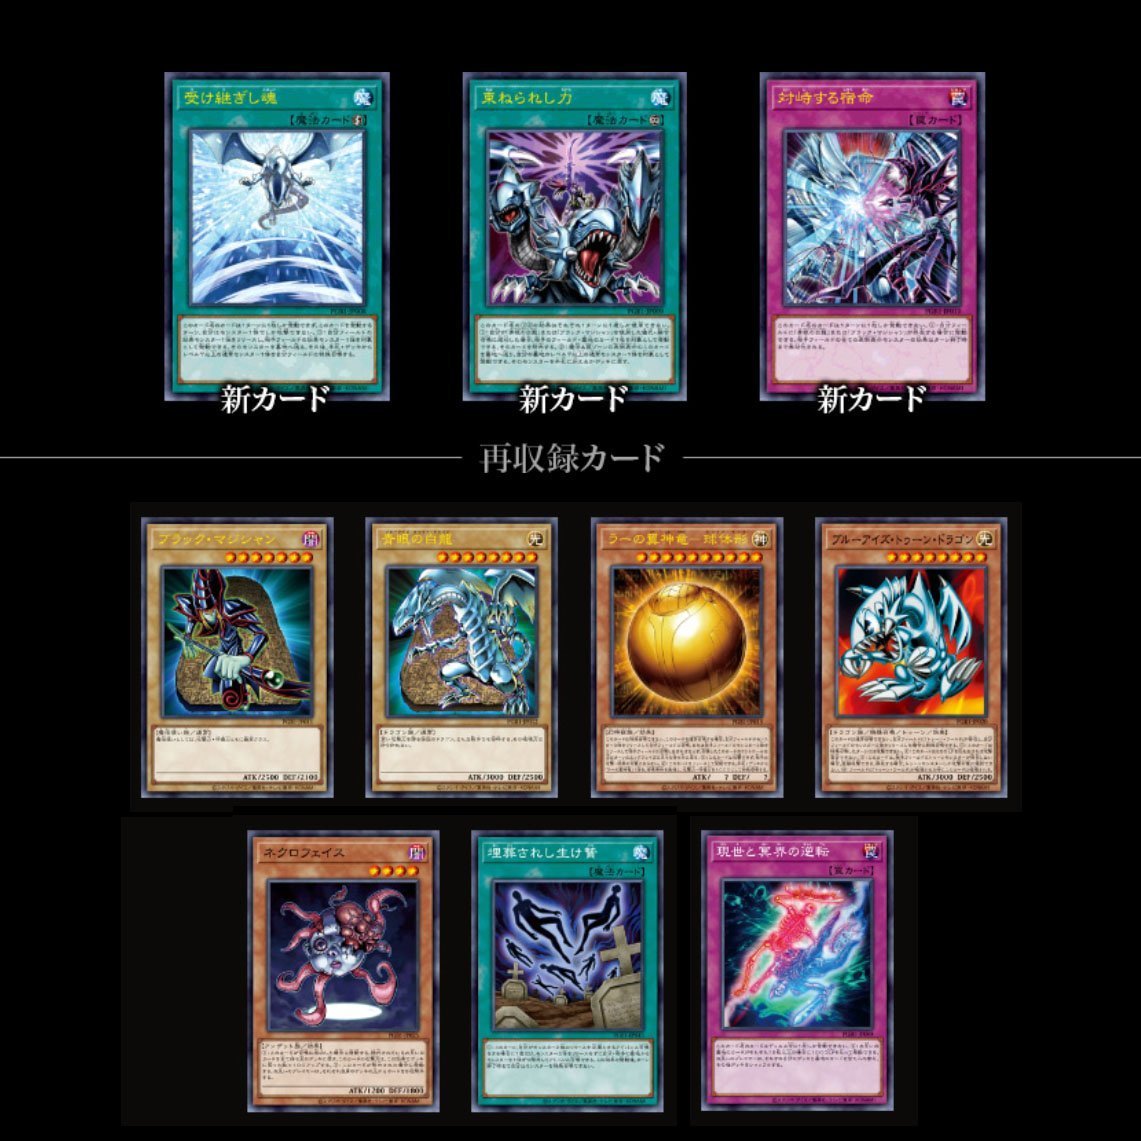 Yu-Gi-Oh! OCG Special Set : &quot;Prismatic God Box&quot; (Japanese)-Prismatic God Box [PGB1] only-Konami-Ace Cards &amp; Collectibles